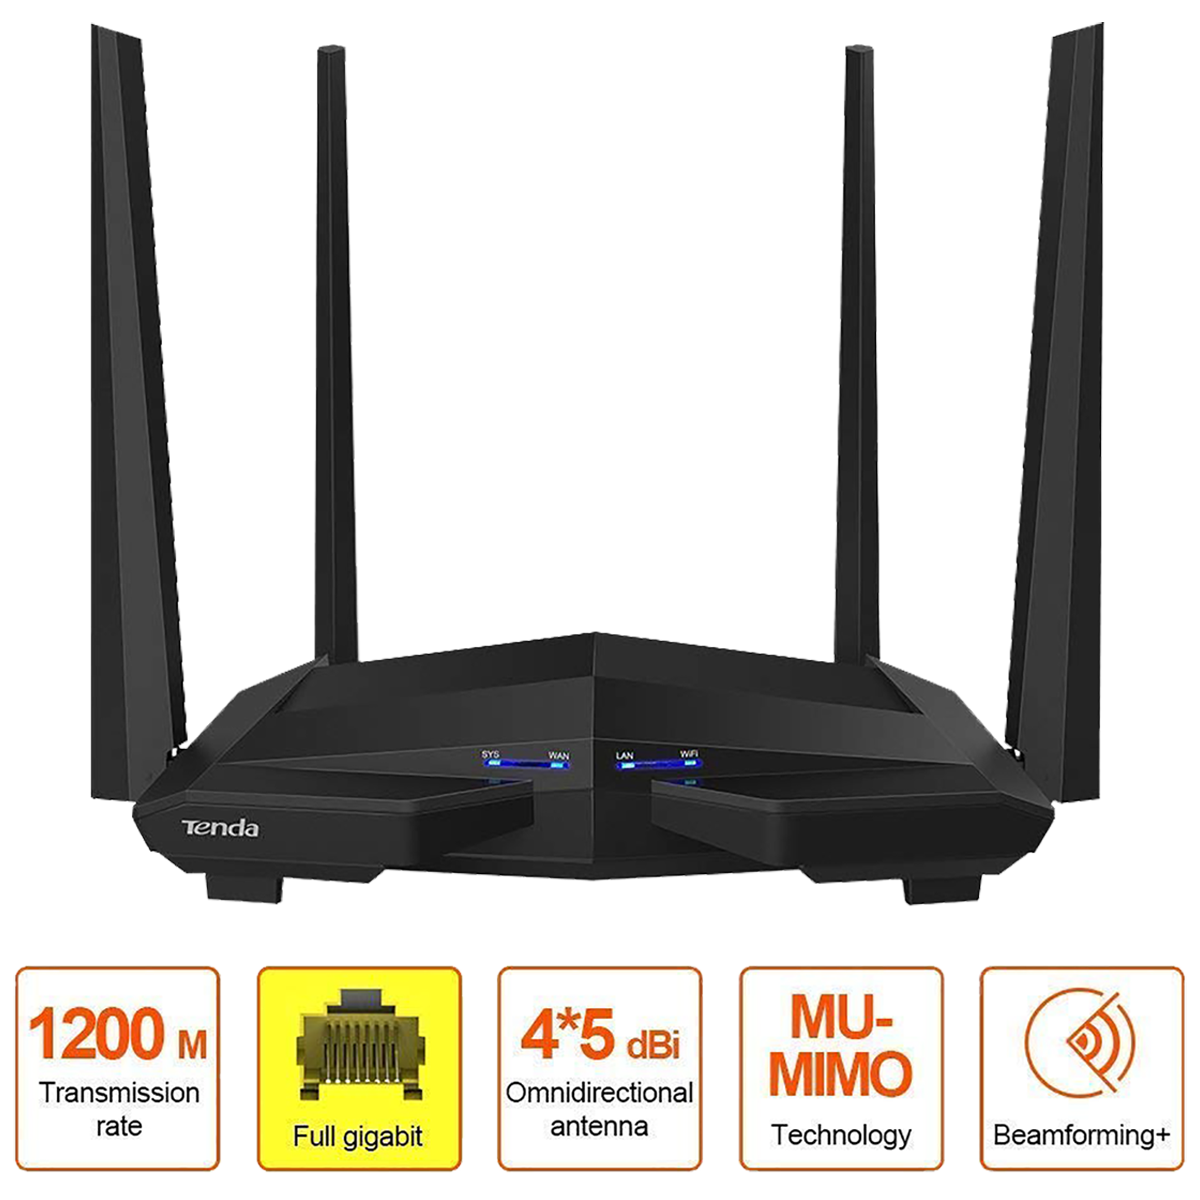 Tenda AC10 AC1200 1167 Mbps Wireless Gigabit Router (Black) in Delhi at  best price by Sai Network Solutions - Justdial